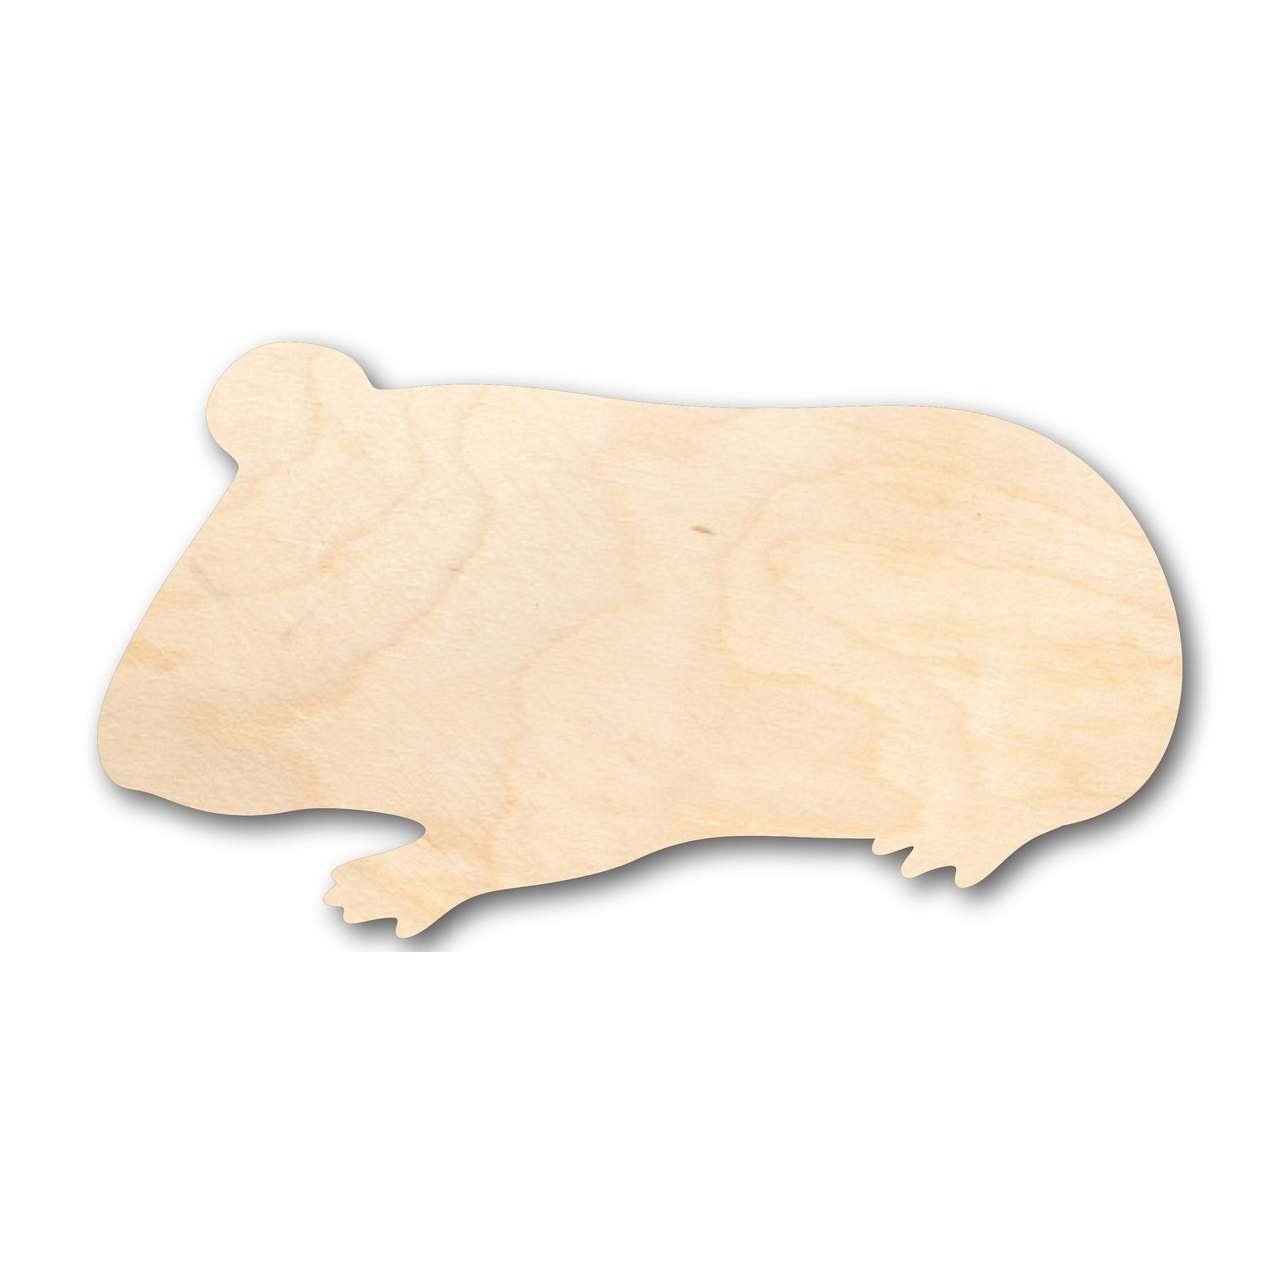 Unfinished Wooden Guinea Pig Shape - Animal - Pet - Craft - up to 24